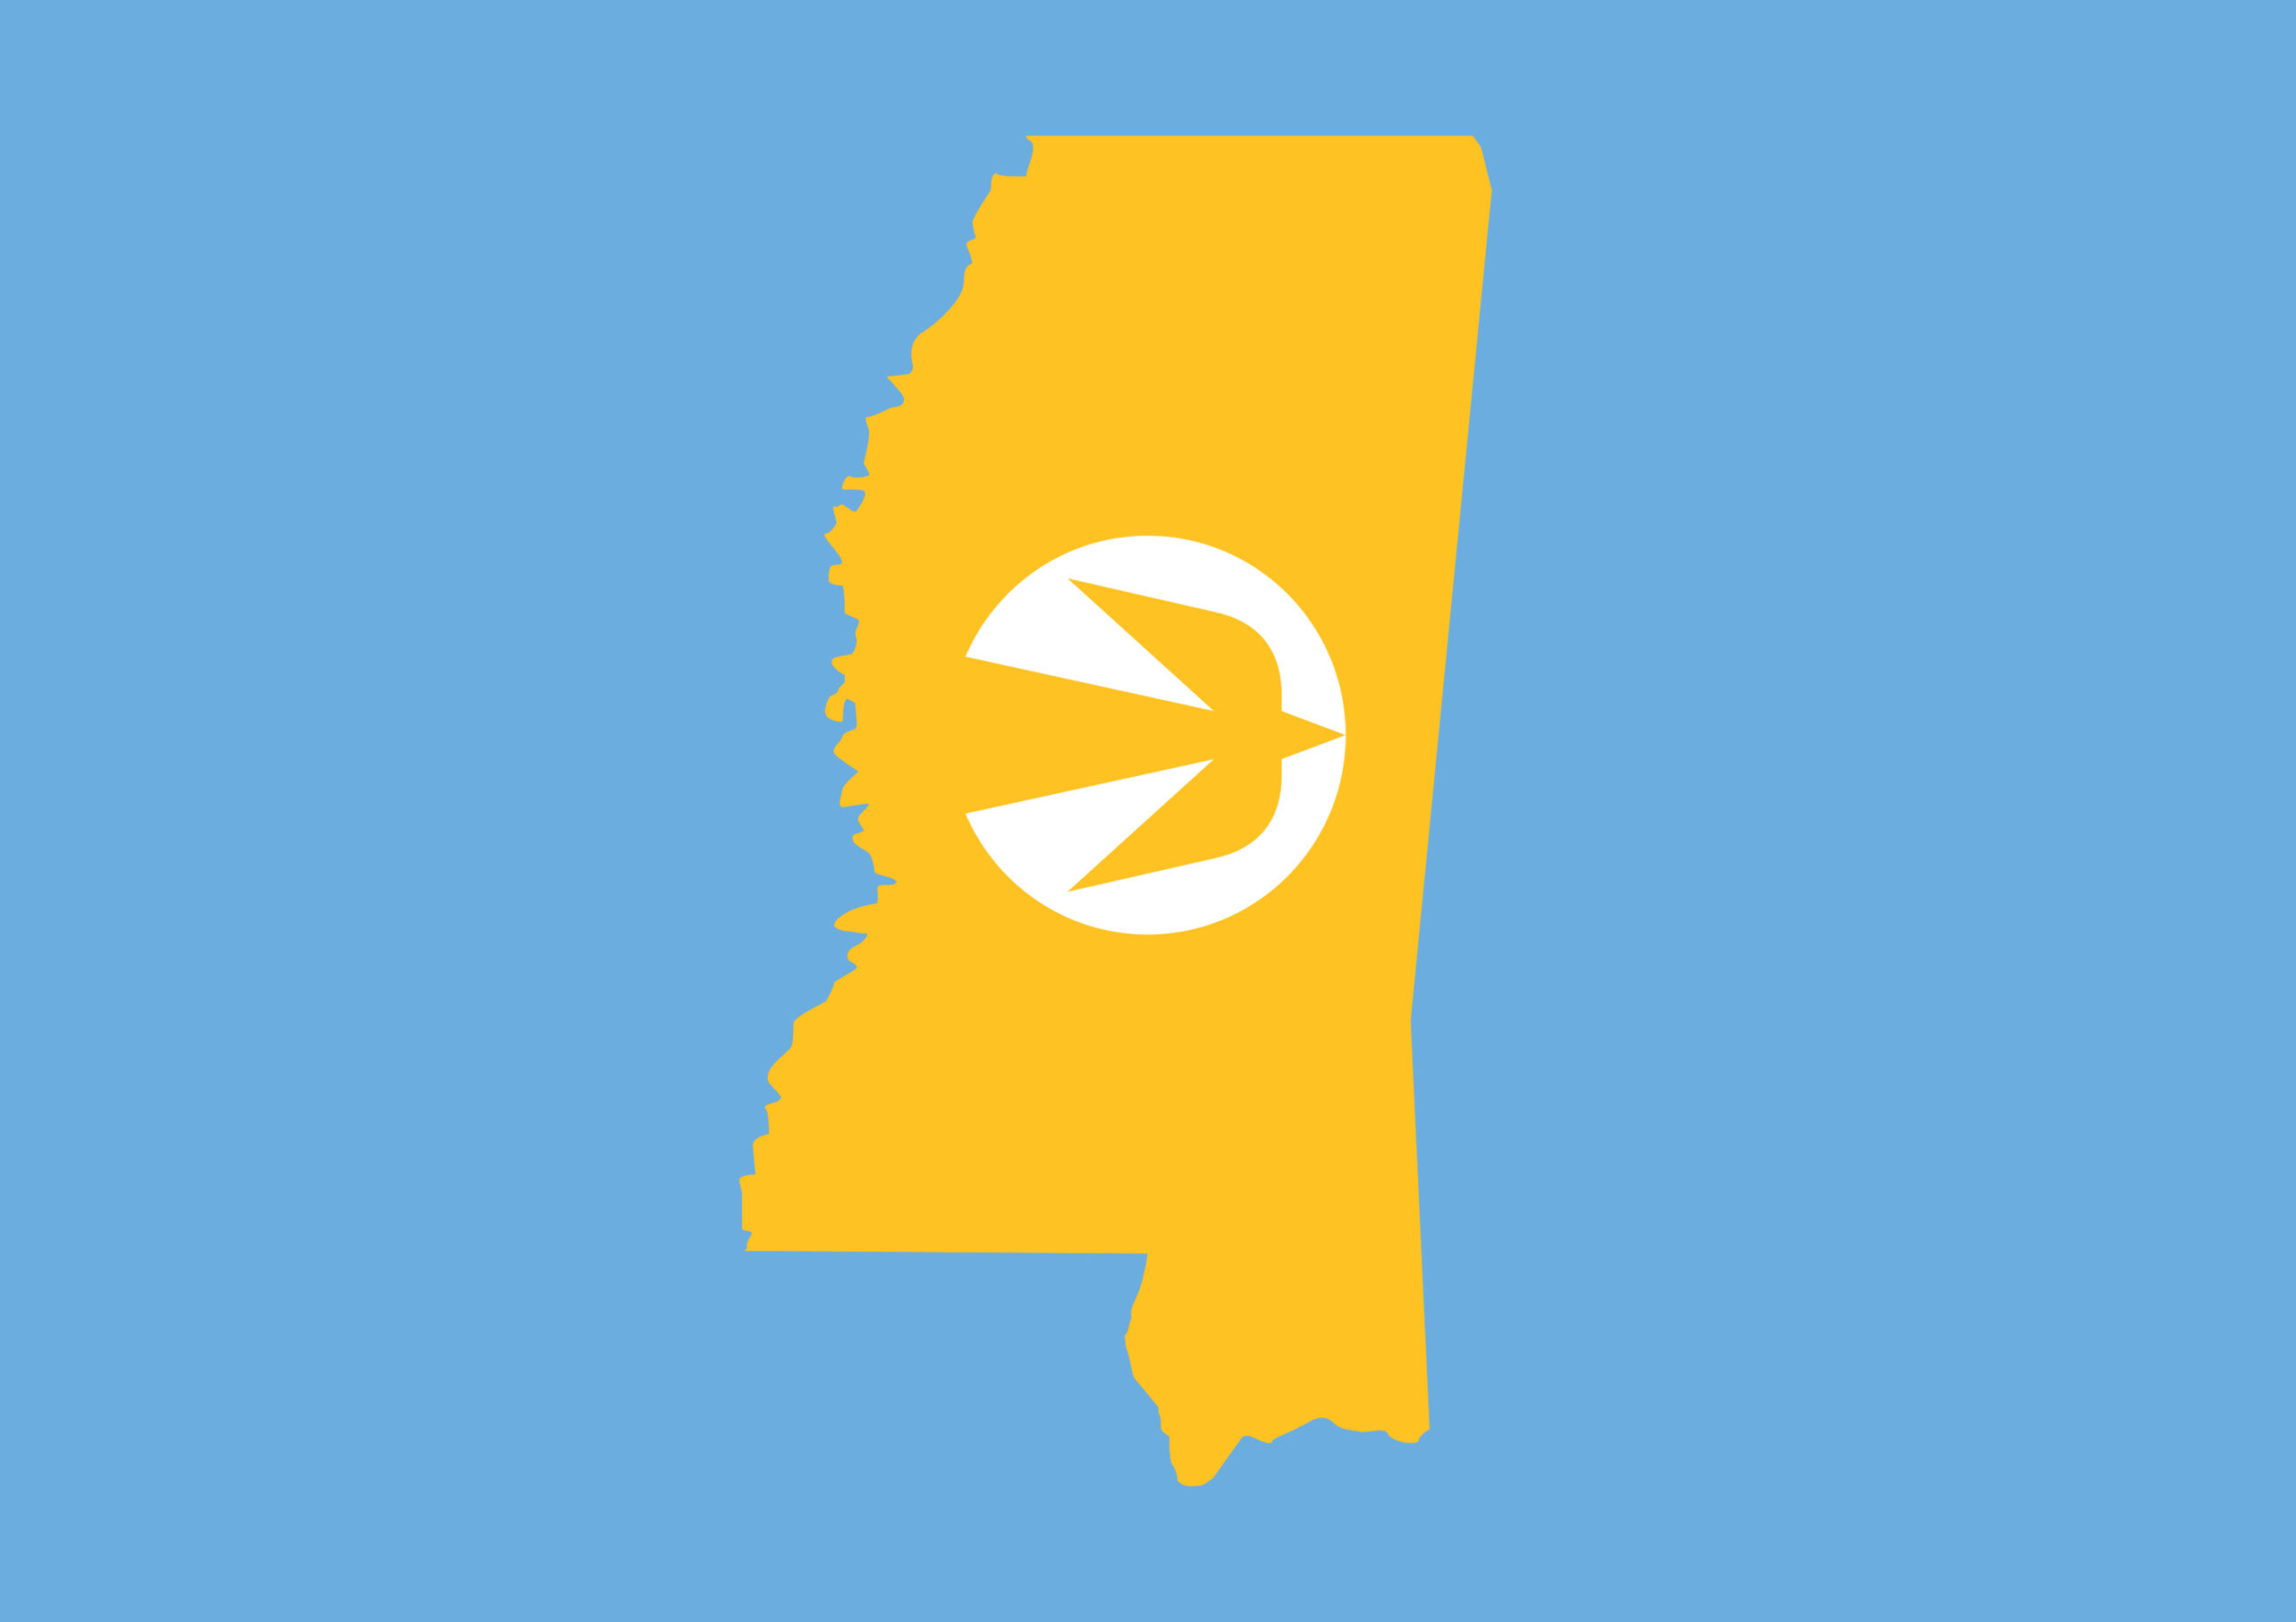 Mississippi state outline in yellow with the Saint Francis Ministries dove logo.